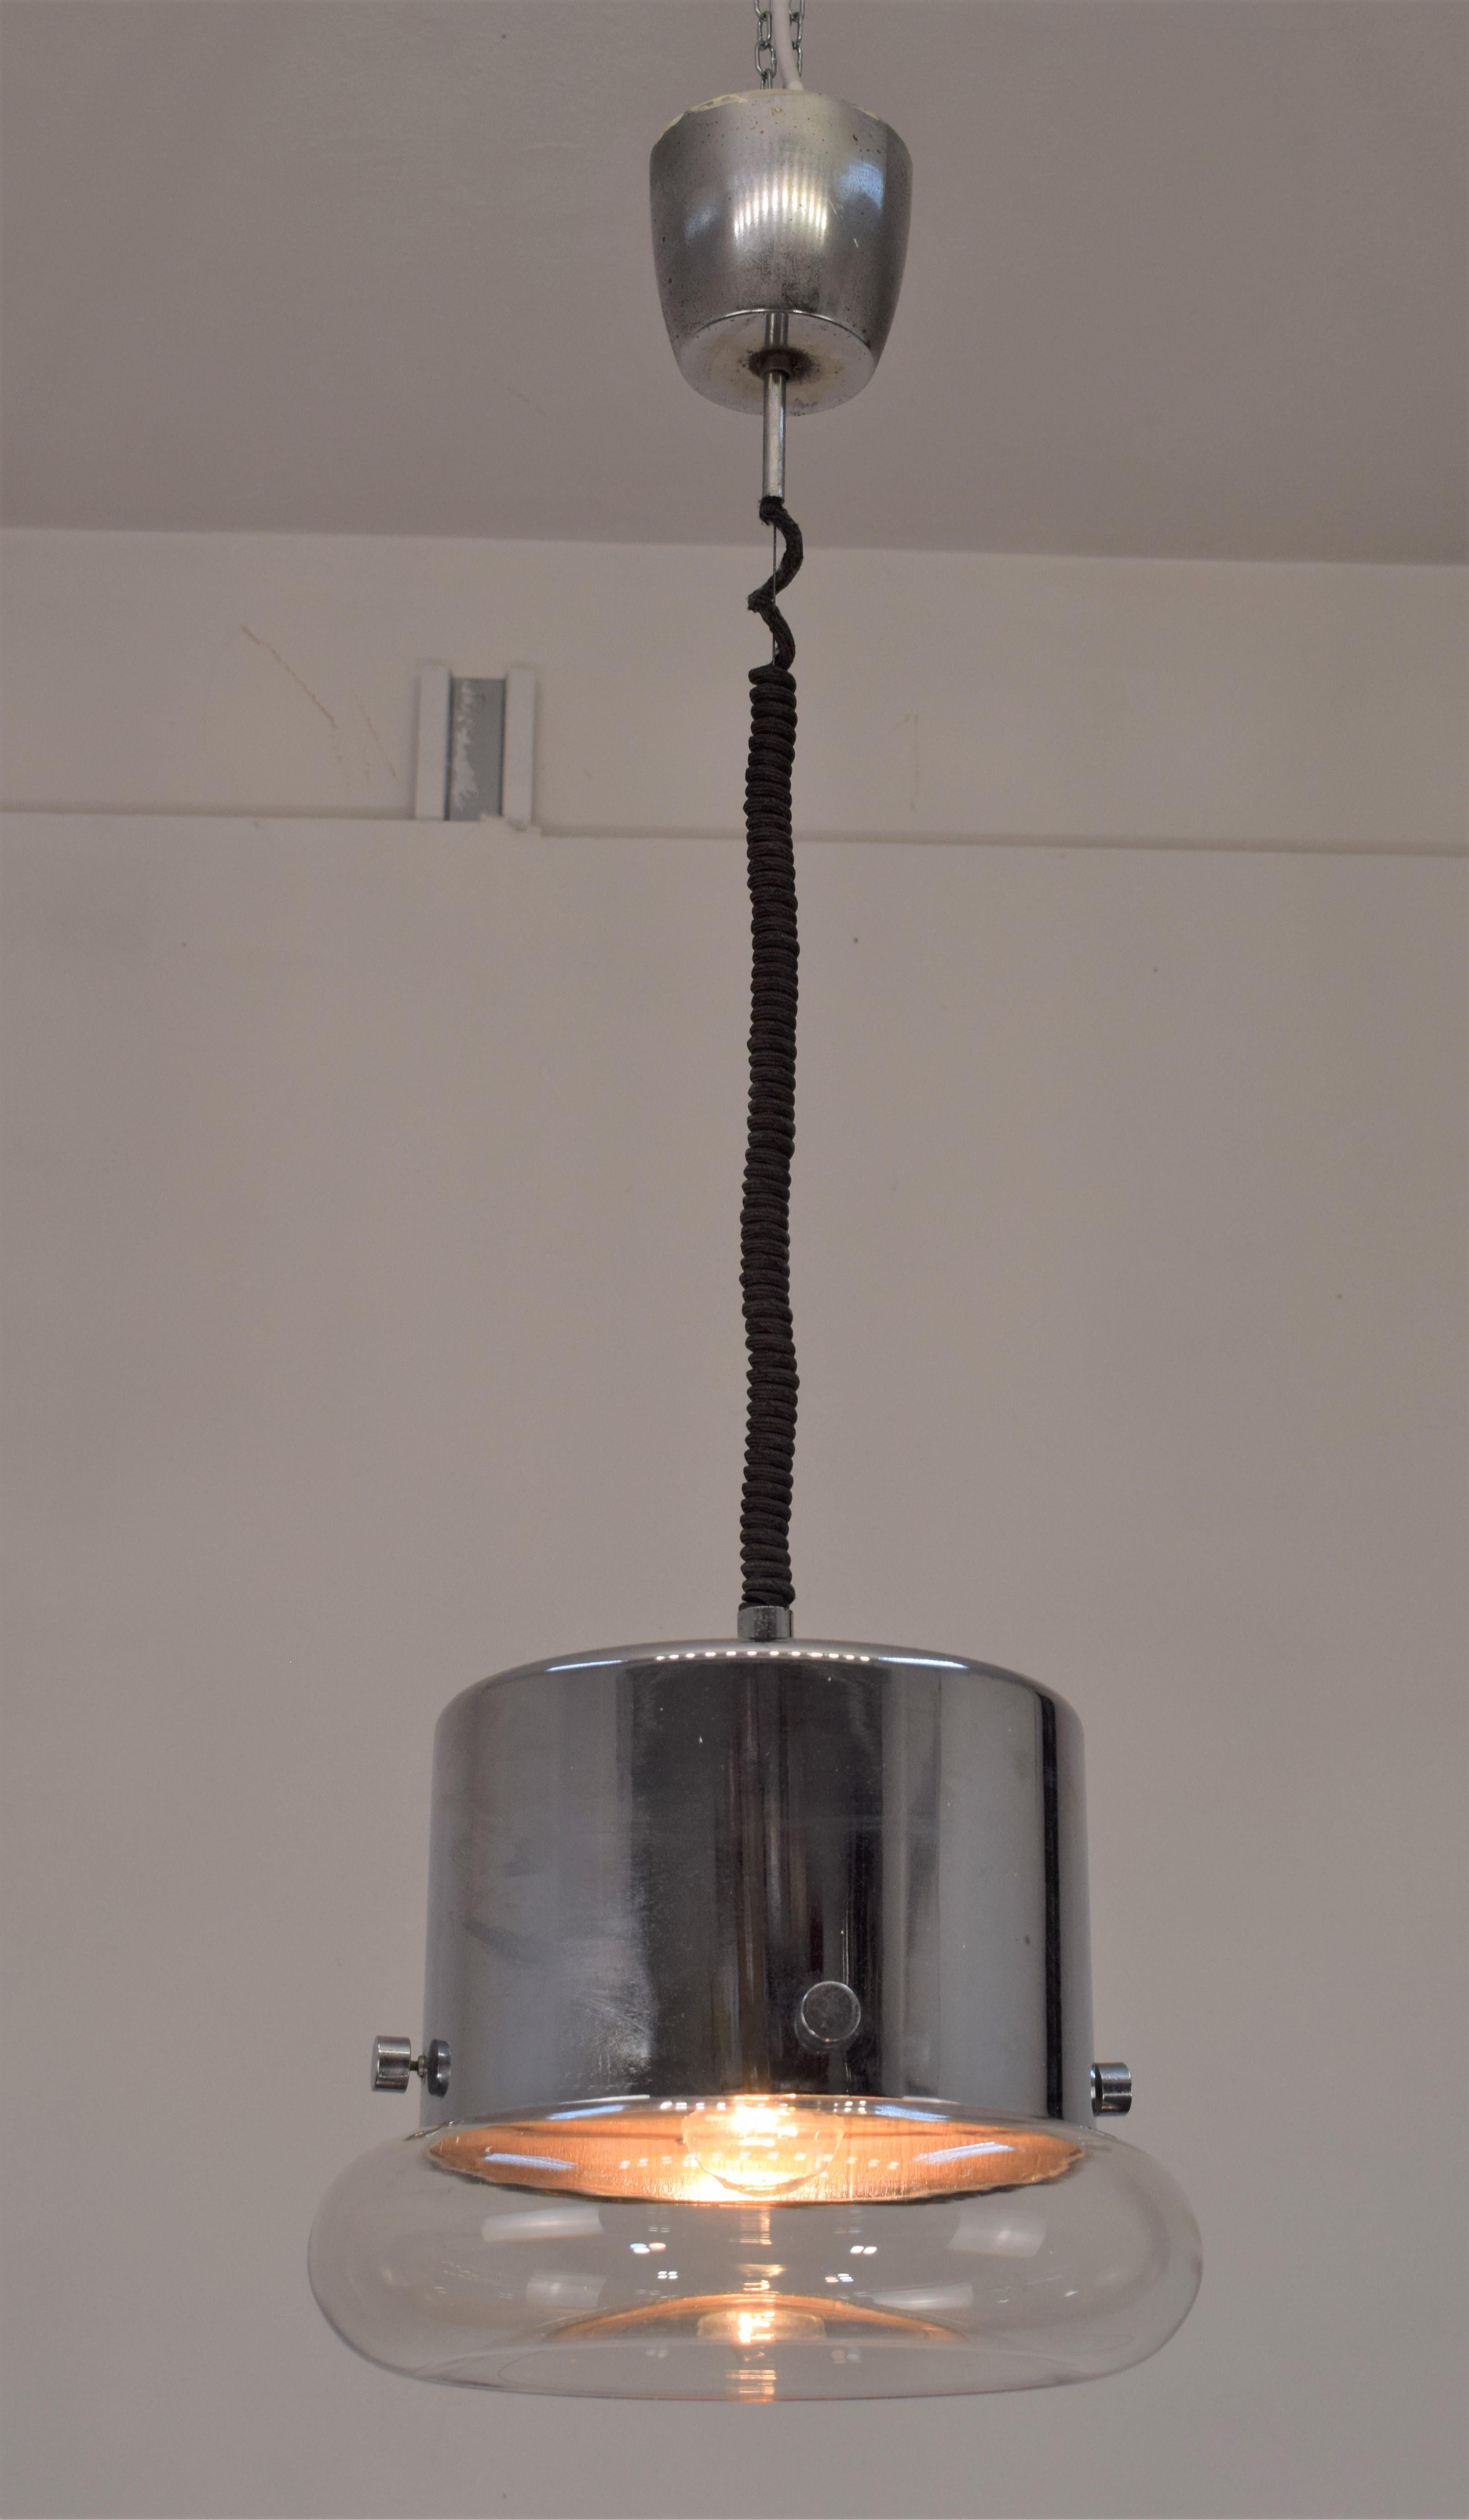 Italian chandelier, steel and glass, 1970s.

Dimensions: H= 90 cm; D= 31 cm.